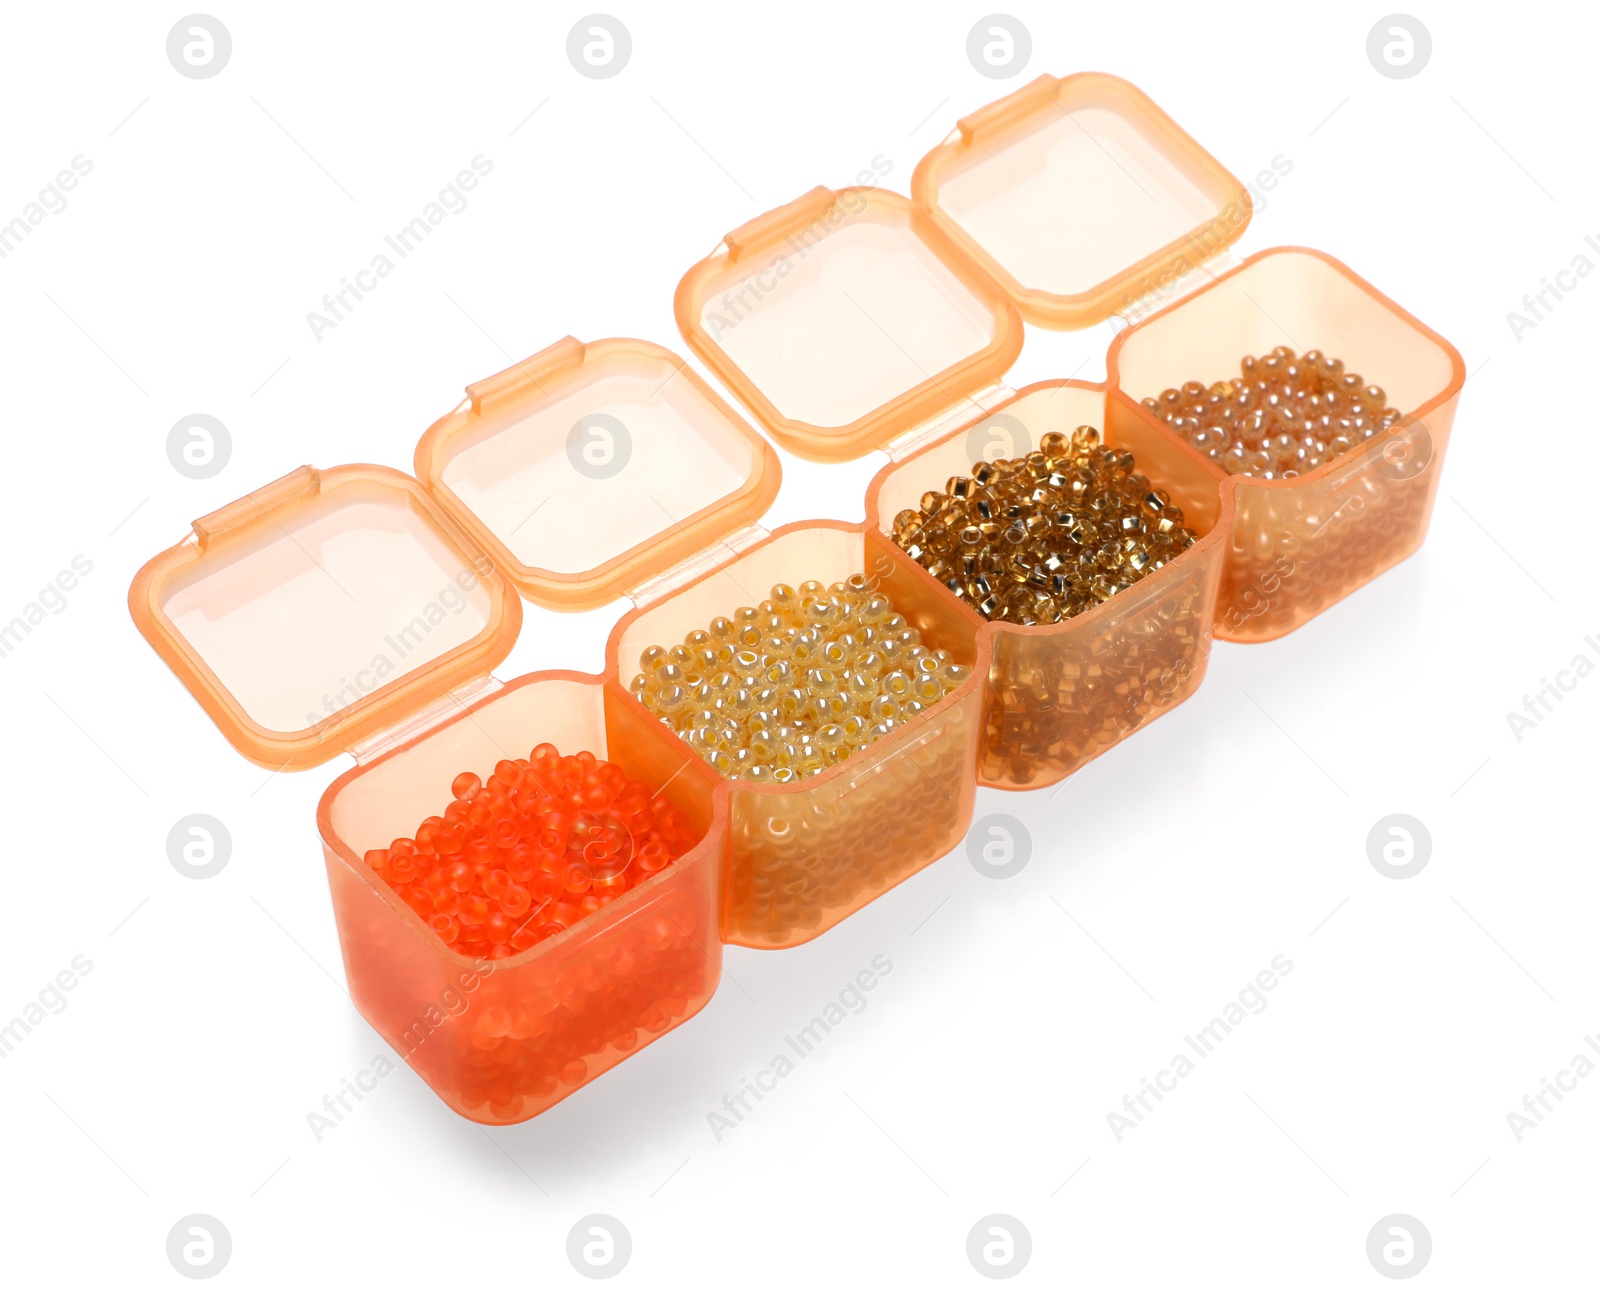 Photo of Plastic organizer with different beads on white background